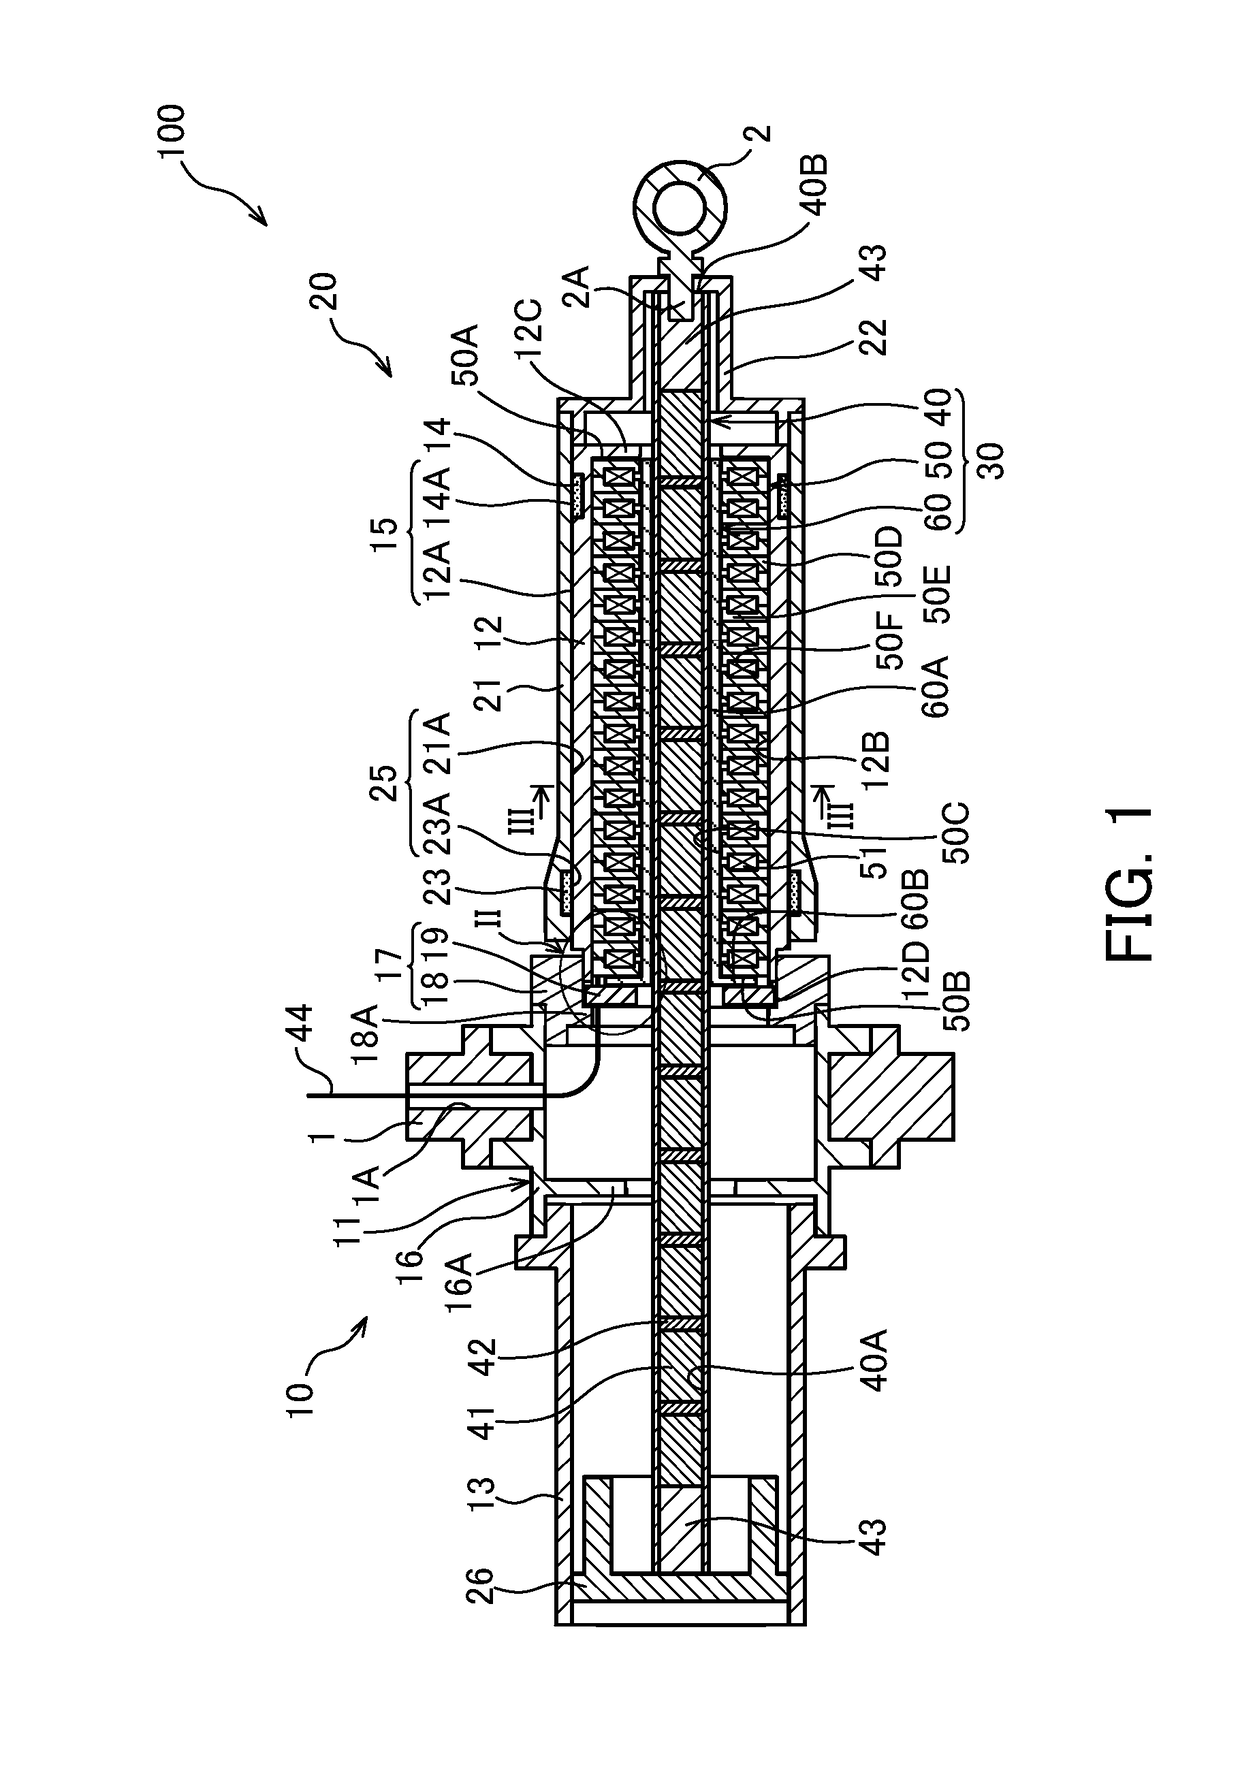 Linear motor and linear actuator having the same